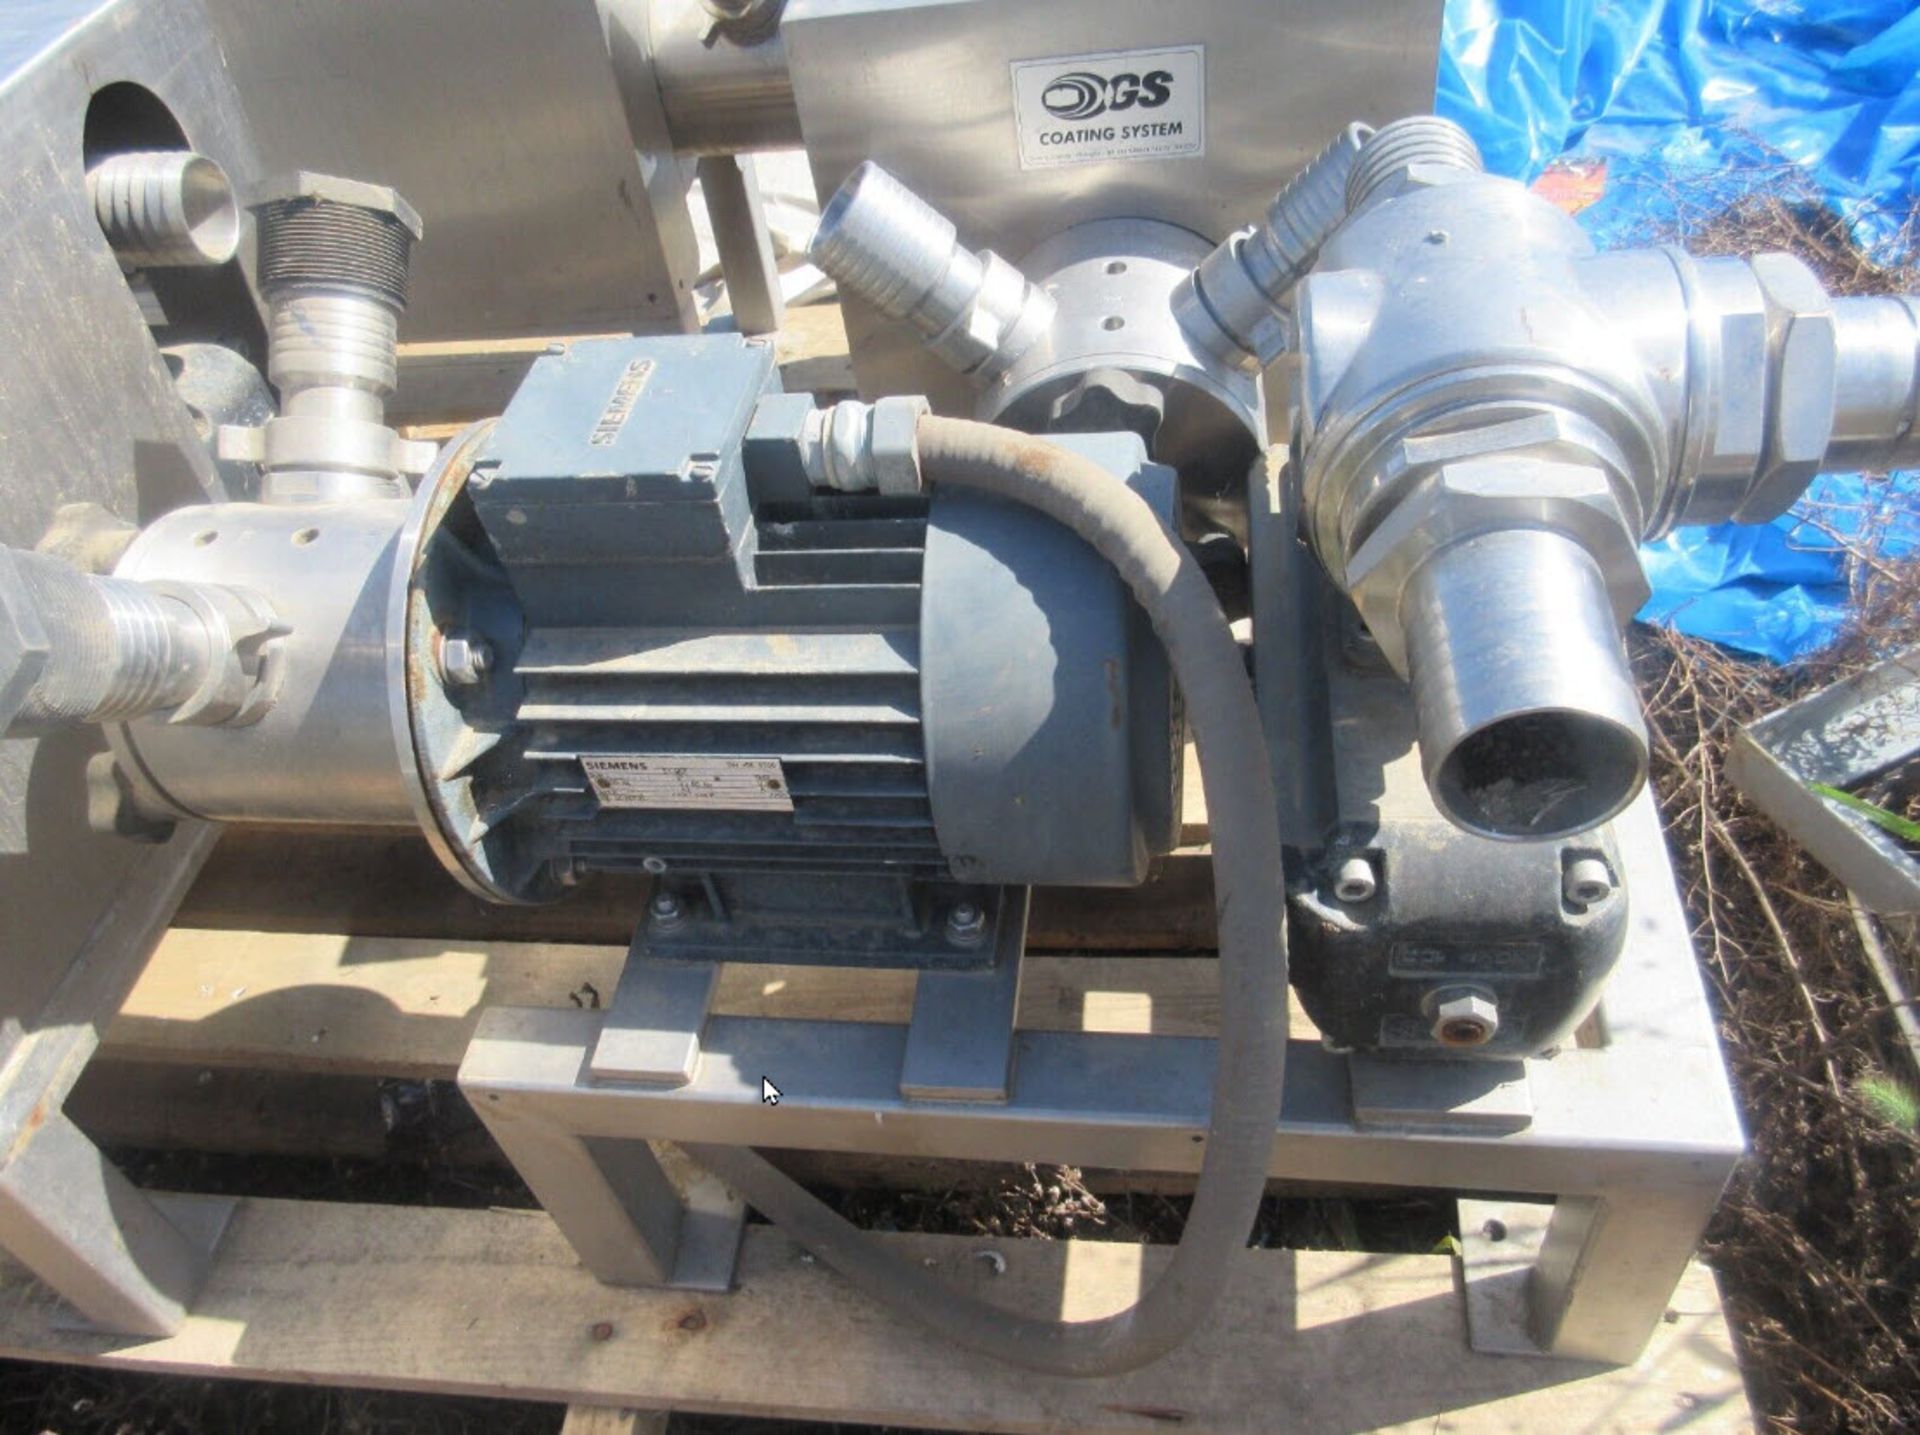 (Located in Hollister, CA) Siemens Coating System Coating Pump, Rigging Fee: $100 - Image 7 of 11